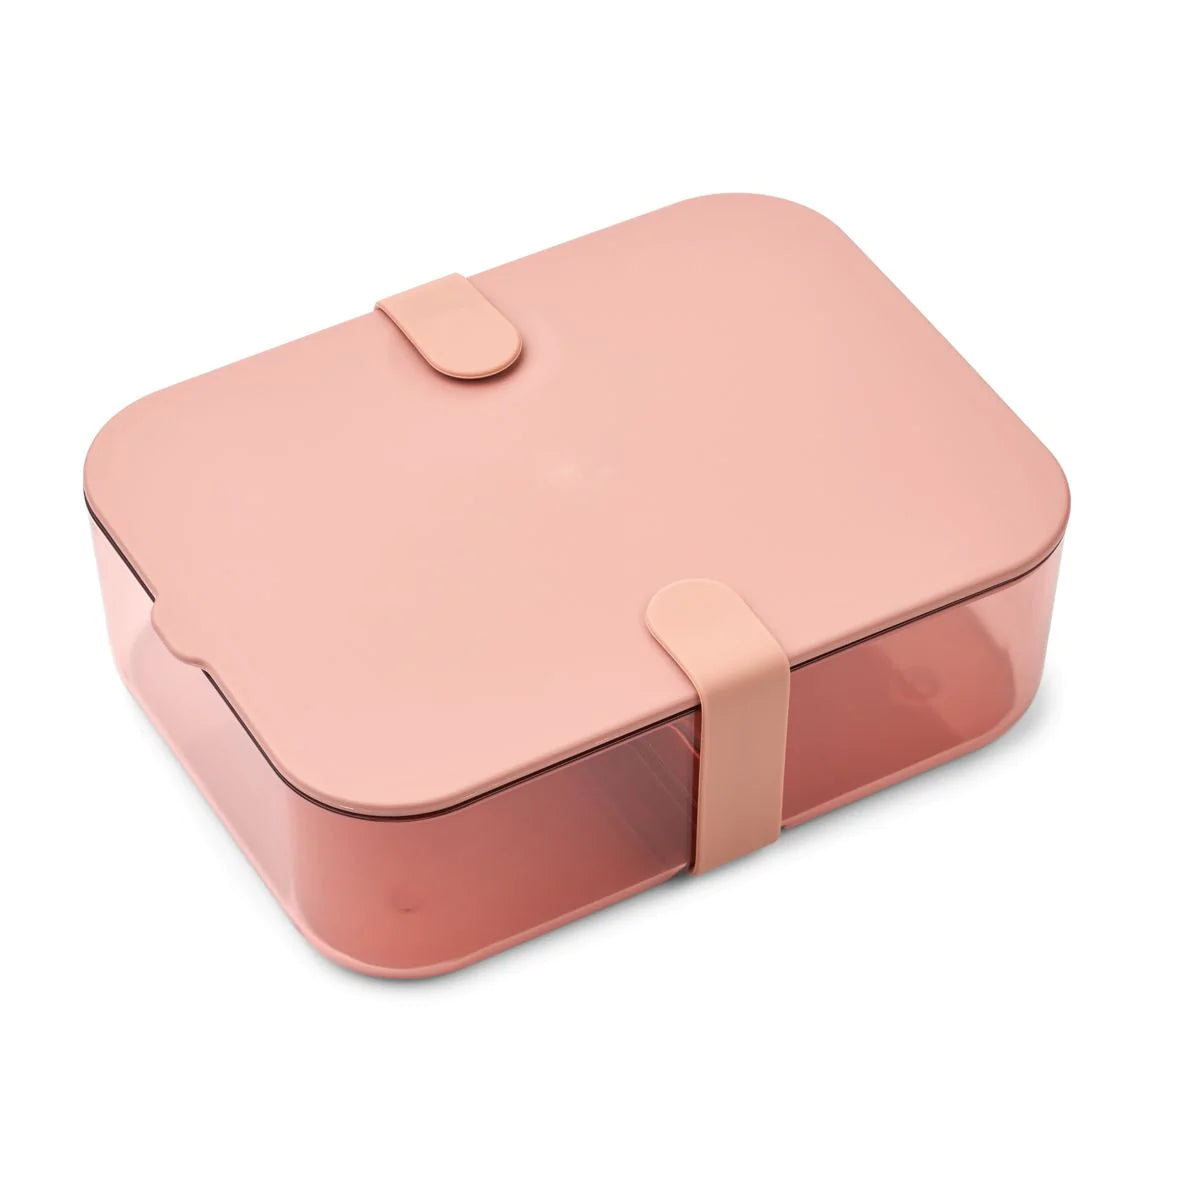 CARIN LUNCH BOX LARGE - TUSCANY ROSE/DUSTY MIX, LIEWOOD